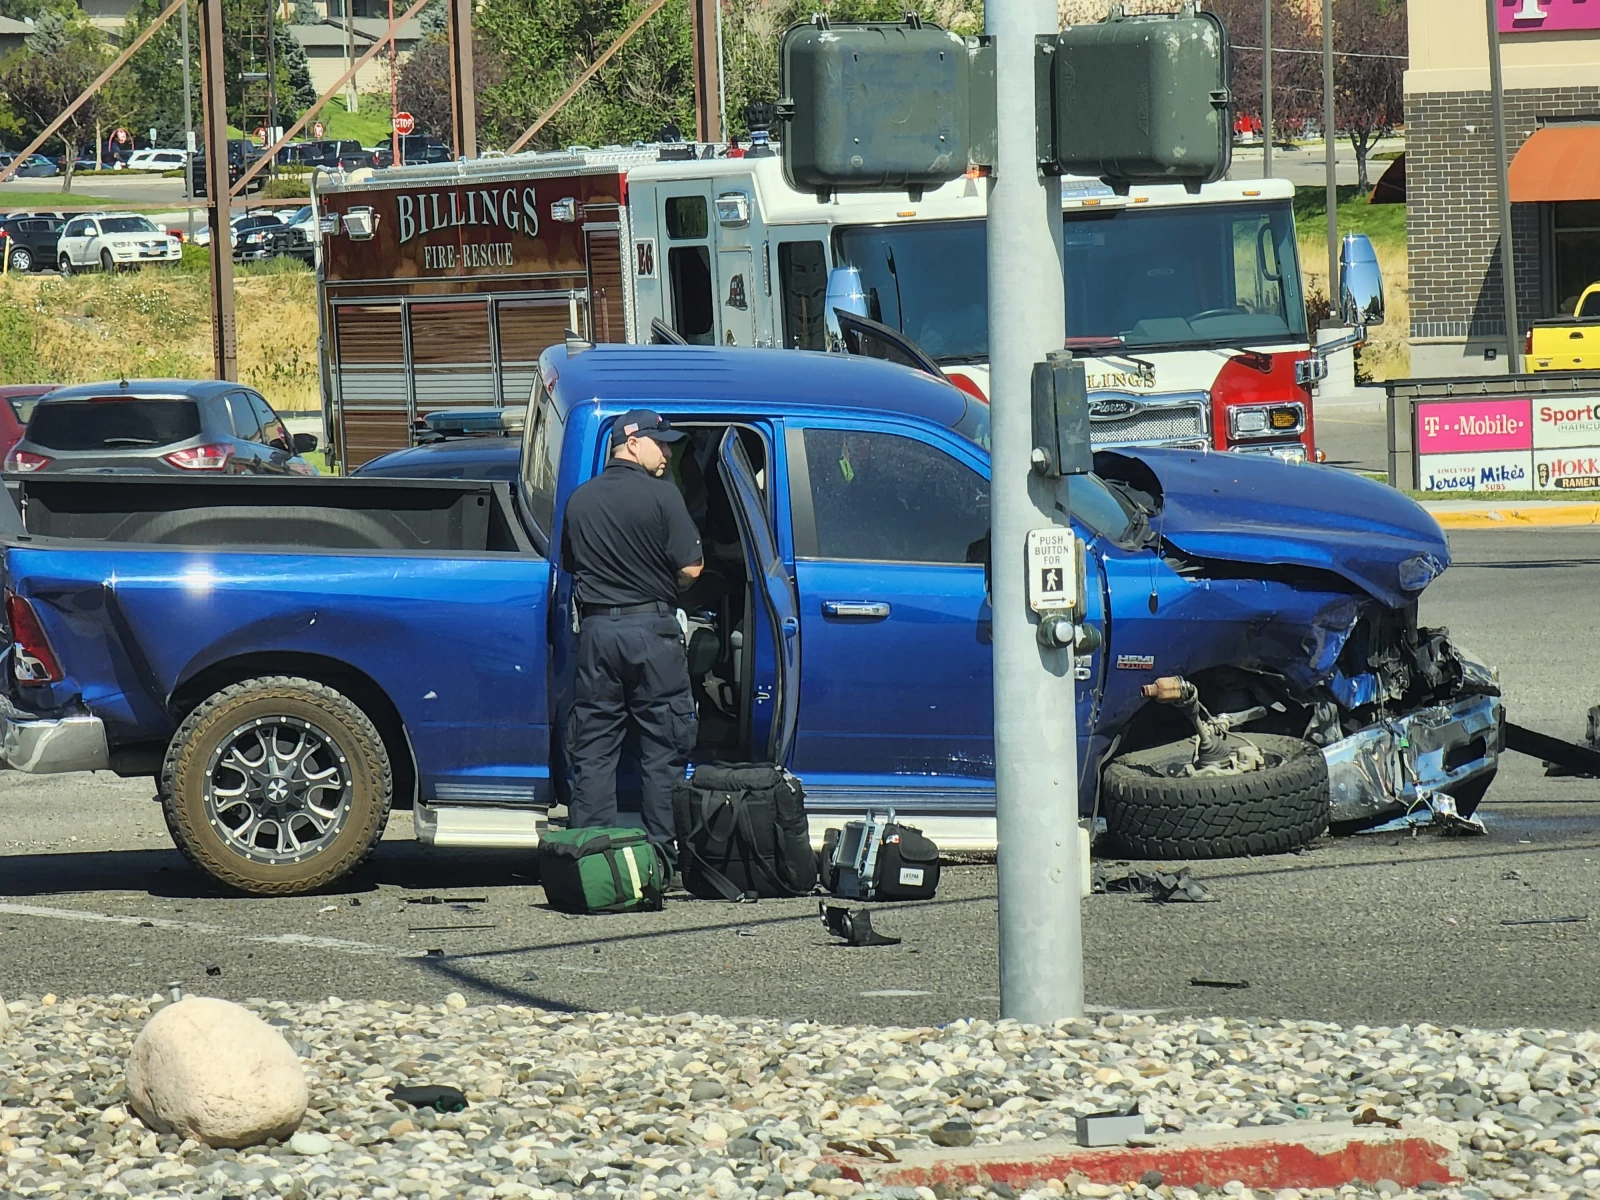 Traffic Delayed in Billings Heights After Accident With Pickup pic